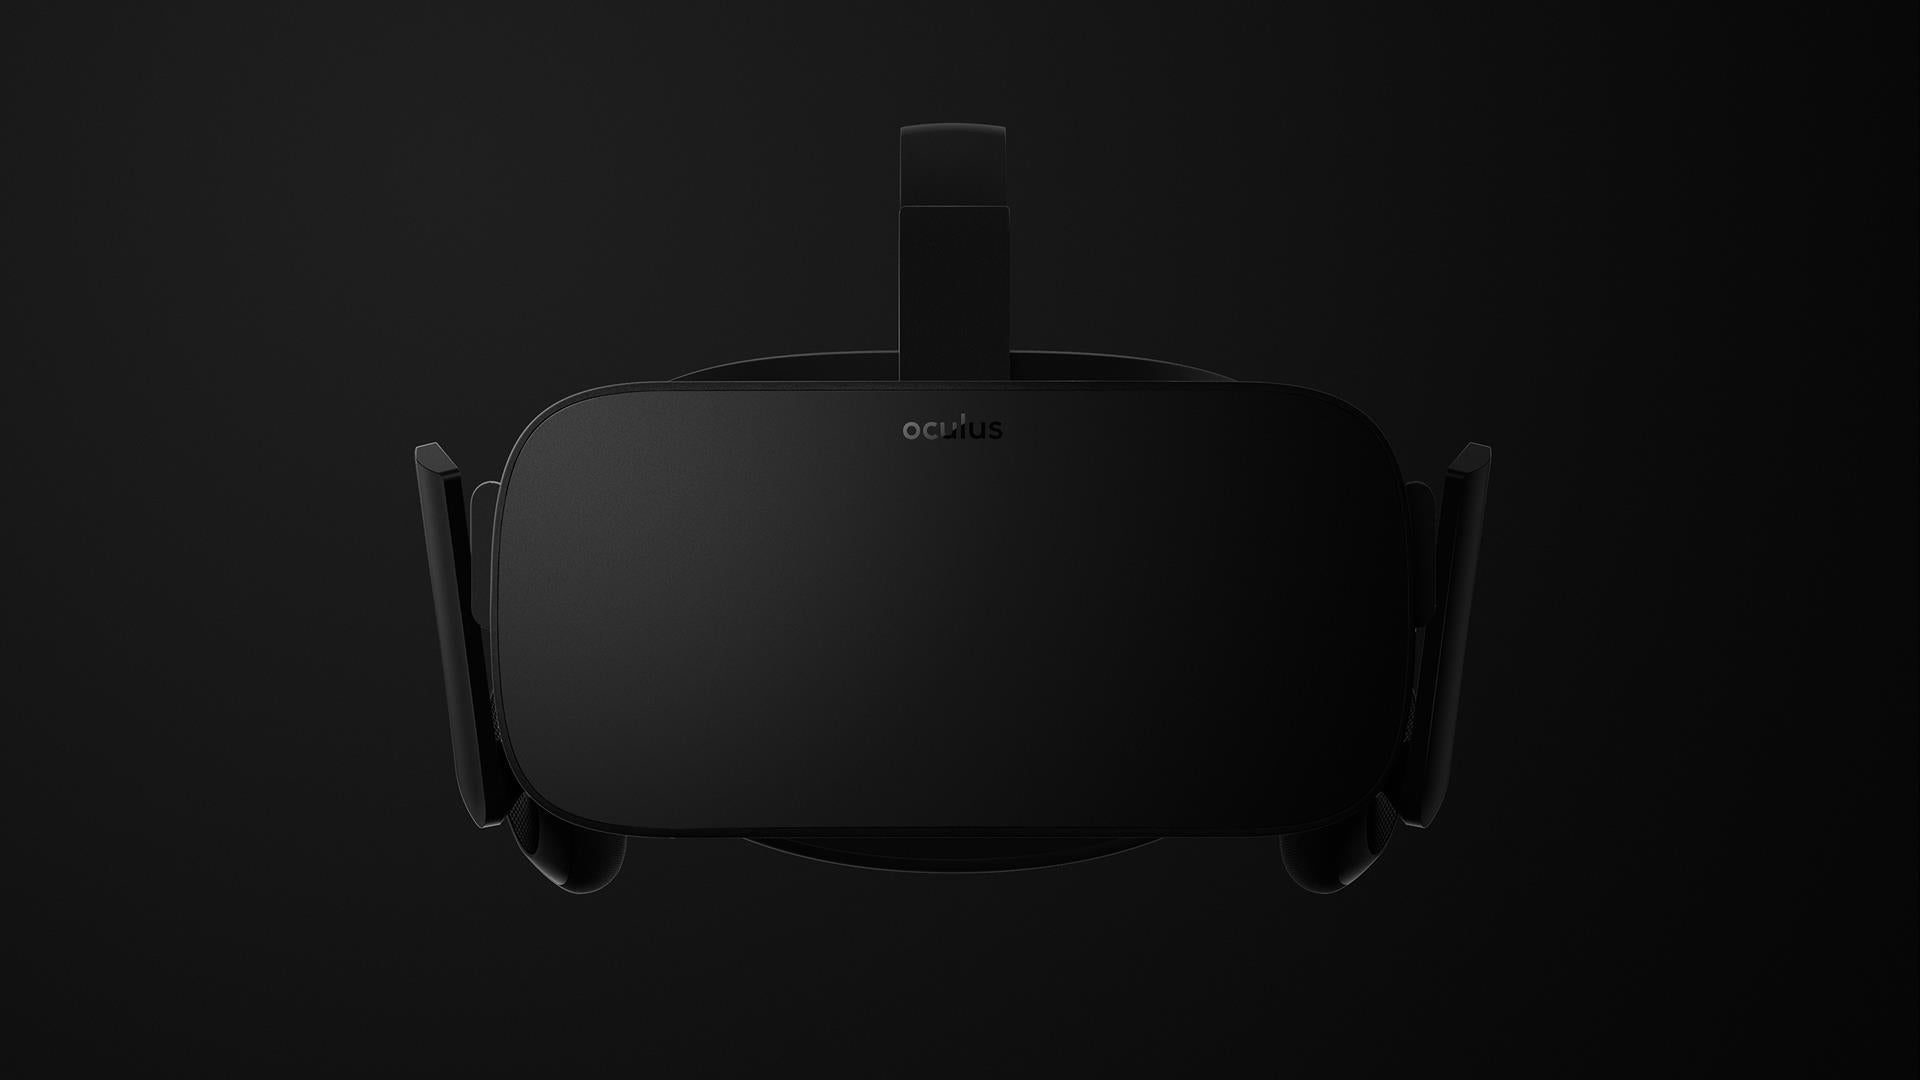 Image for Oculus looking at an "all-in price" of $1,500 for both the headset and a PC 